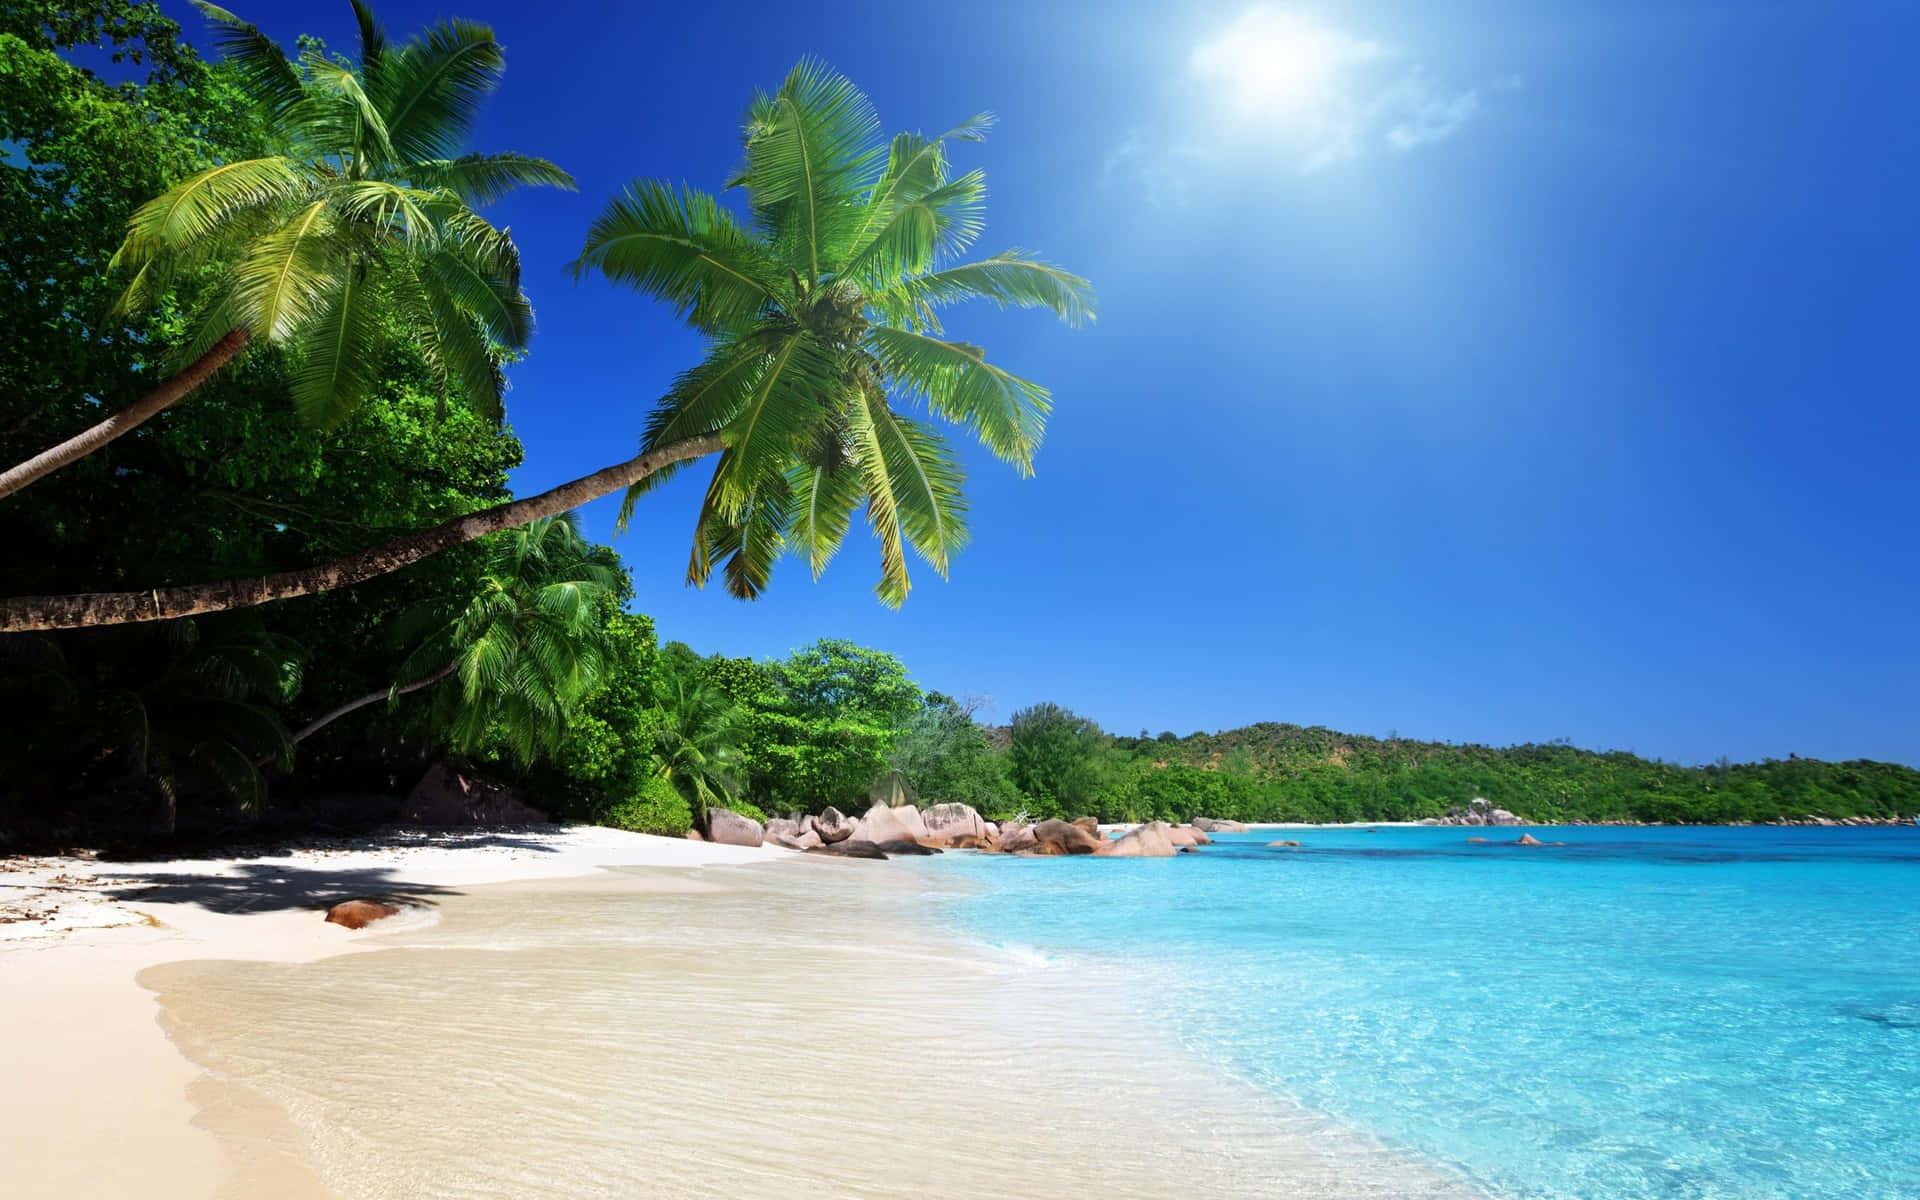 A stunning beach scene with crystal clear blue water and white sandy beach